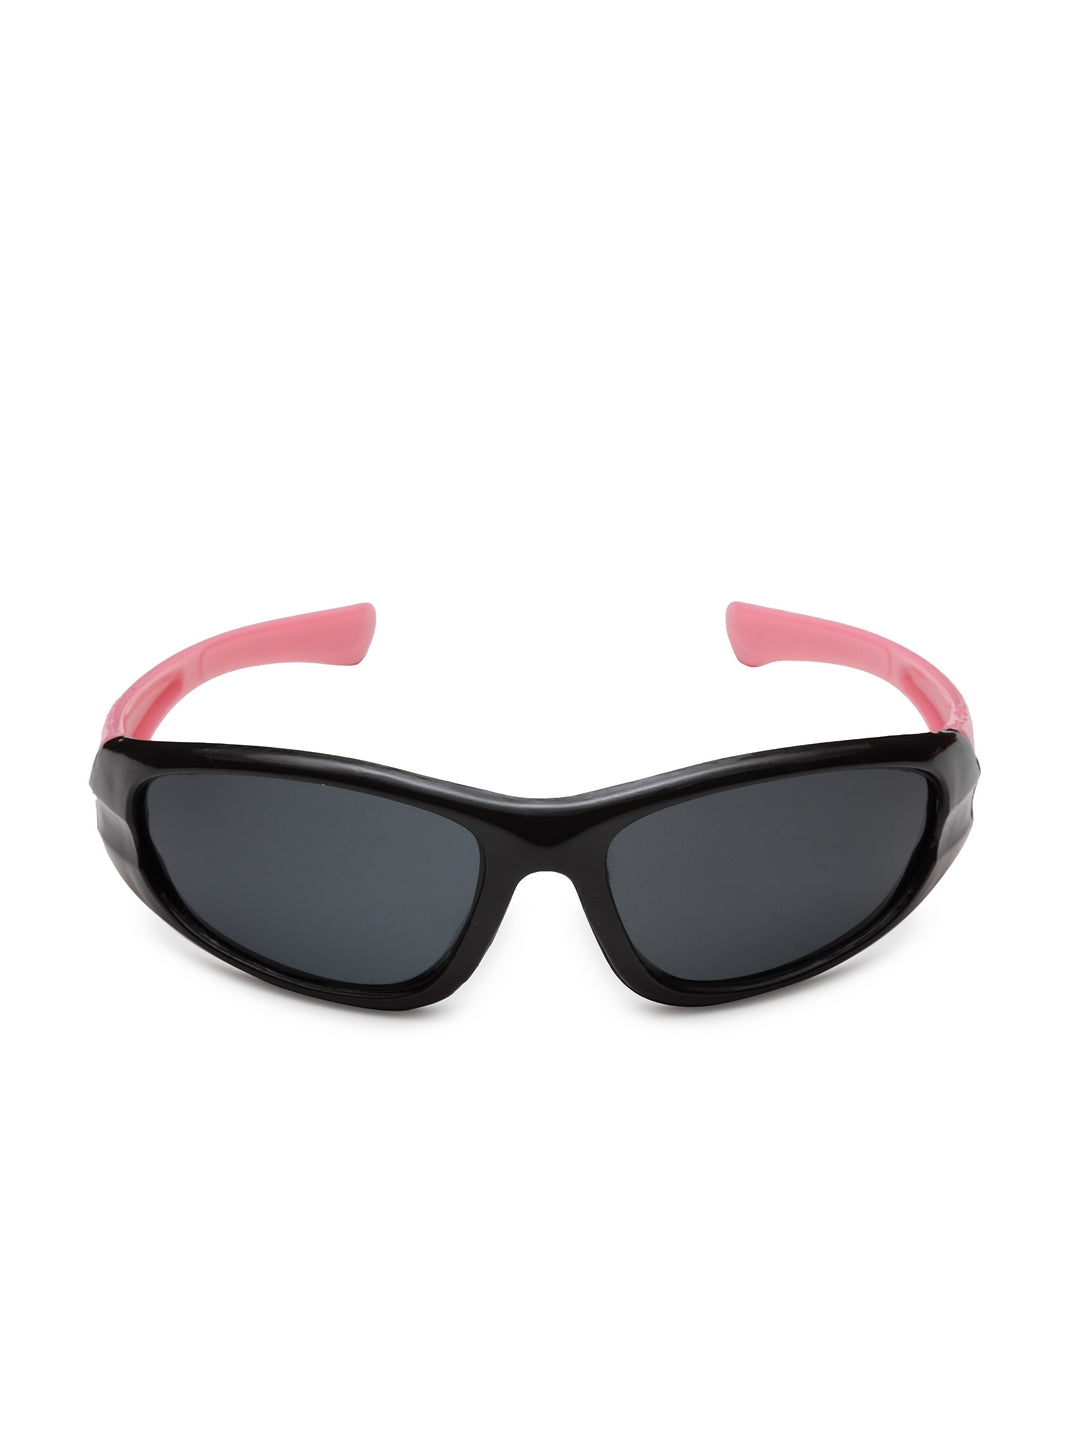 Stol'n  Sunglasses For Kids ( UV Protected) Pink and White